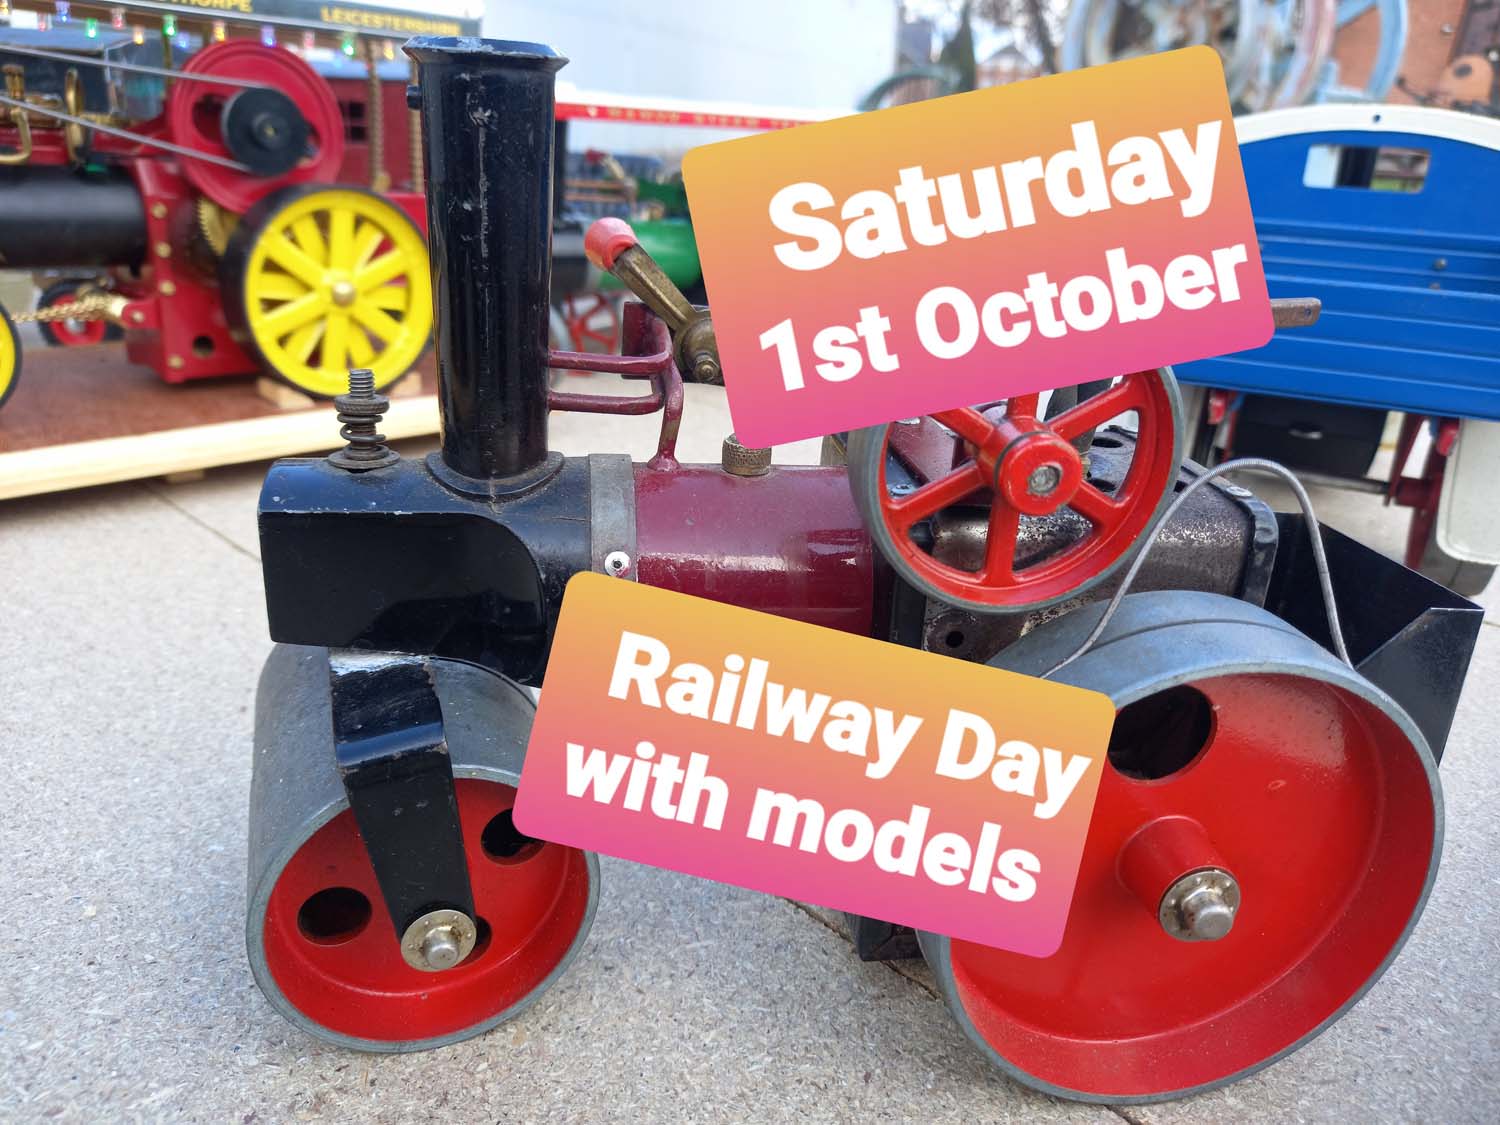  Railway Day with Models